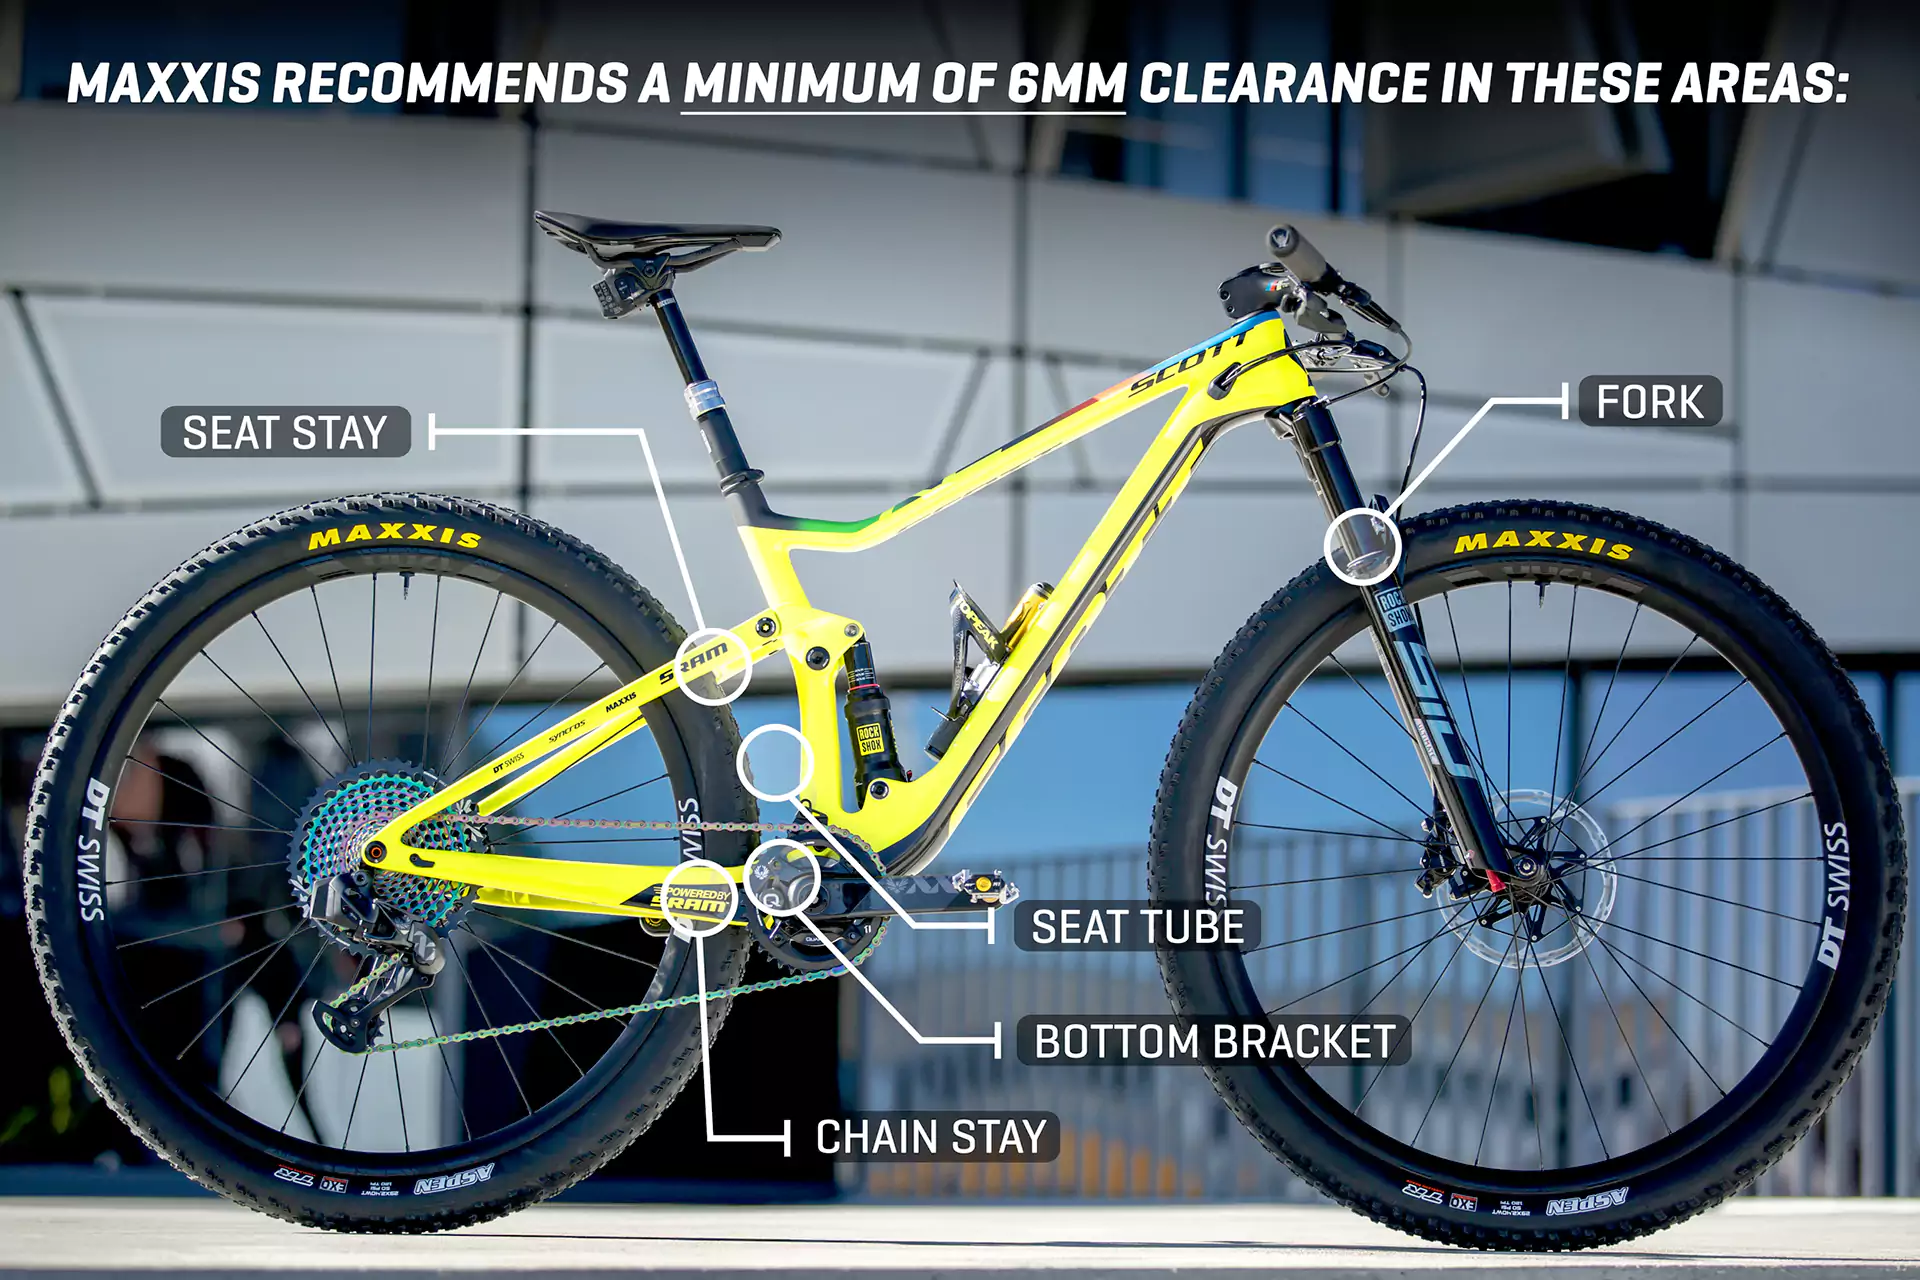 Diagram of recommended 6 millimeter clearance for seat stay, fork, seat tube, bottom bracket, and chain stay.